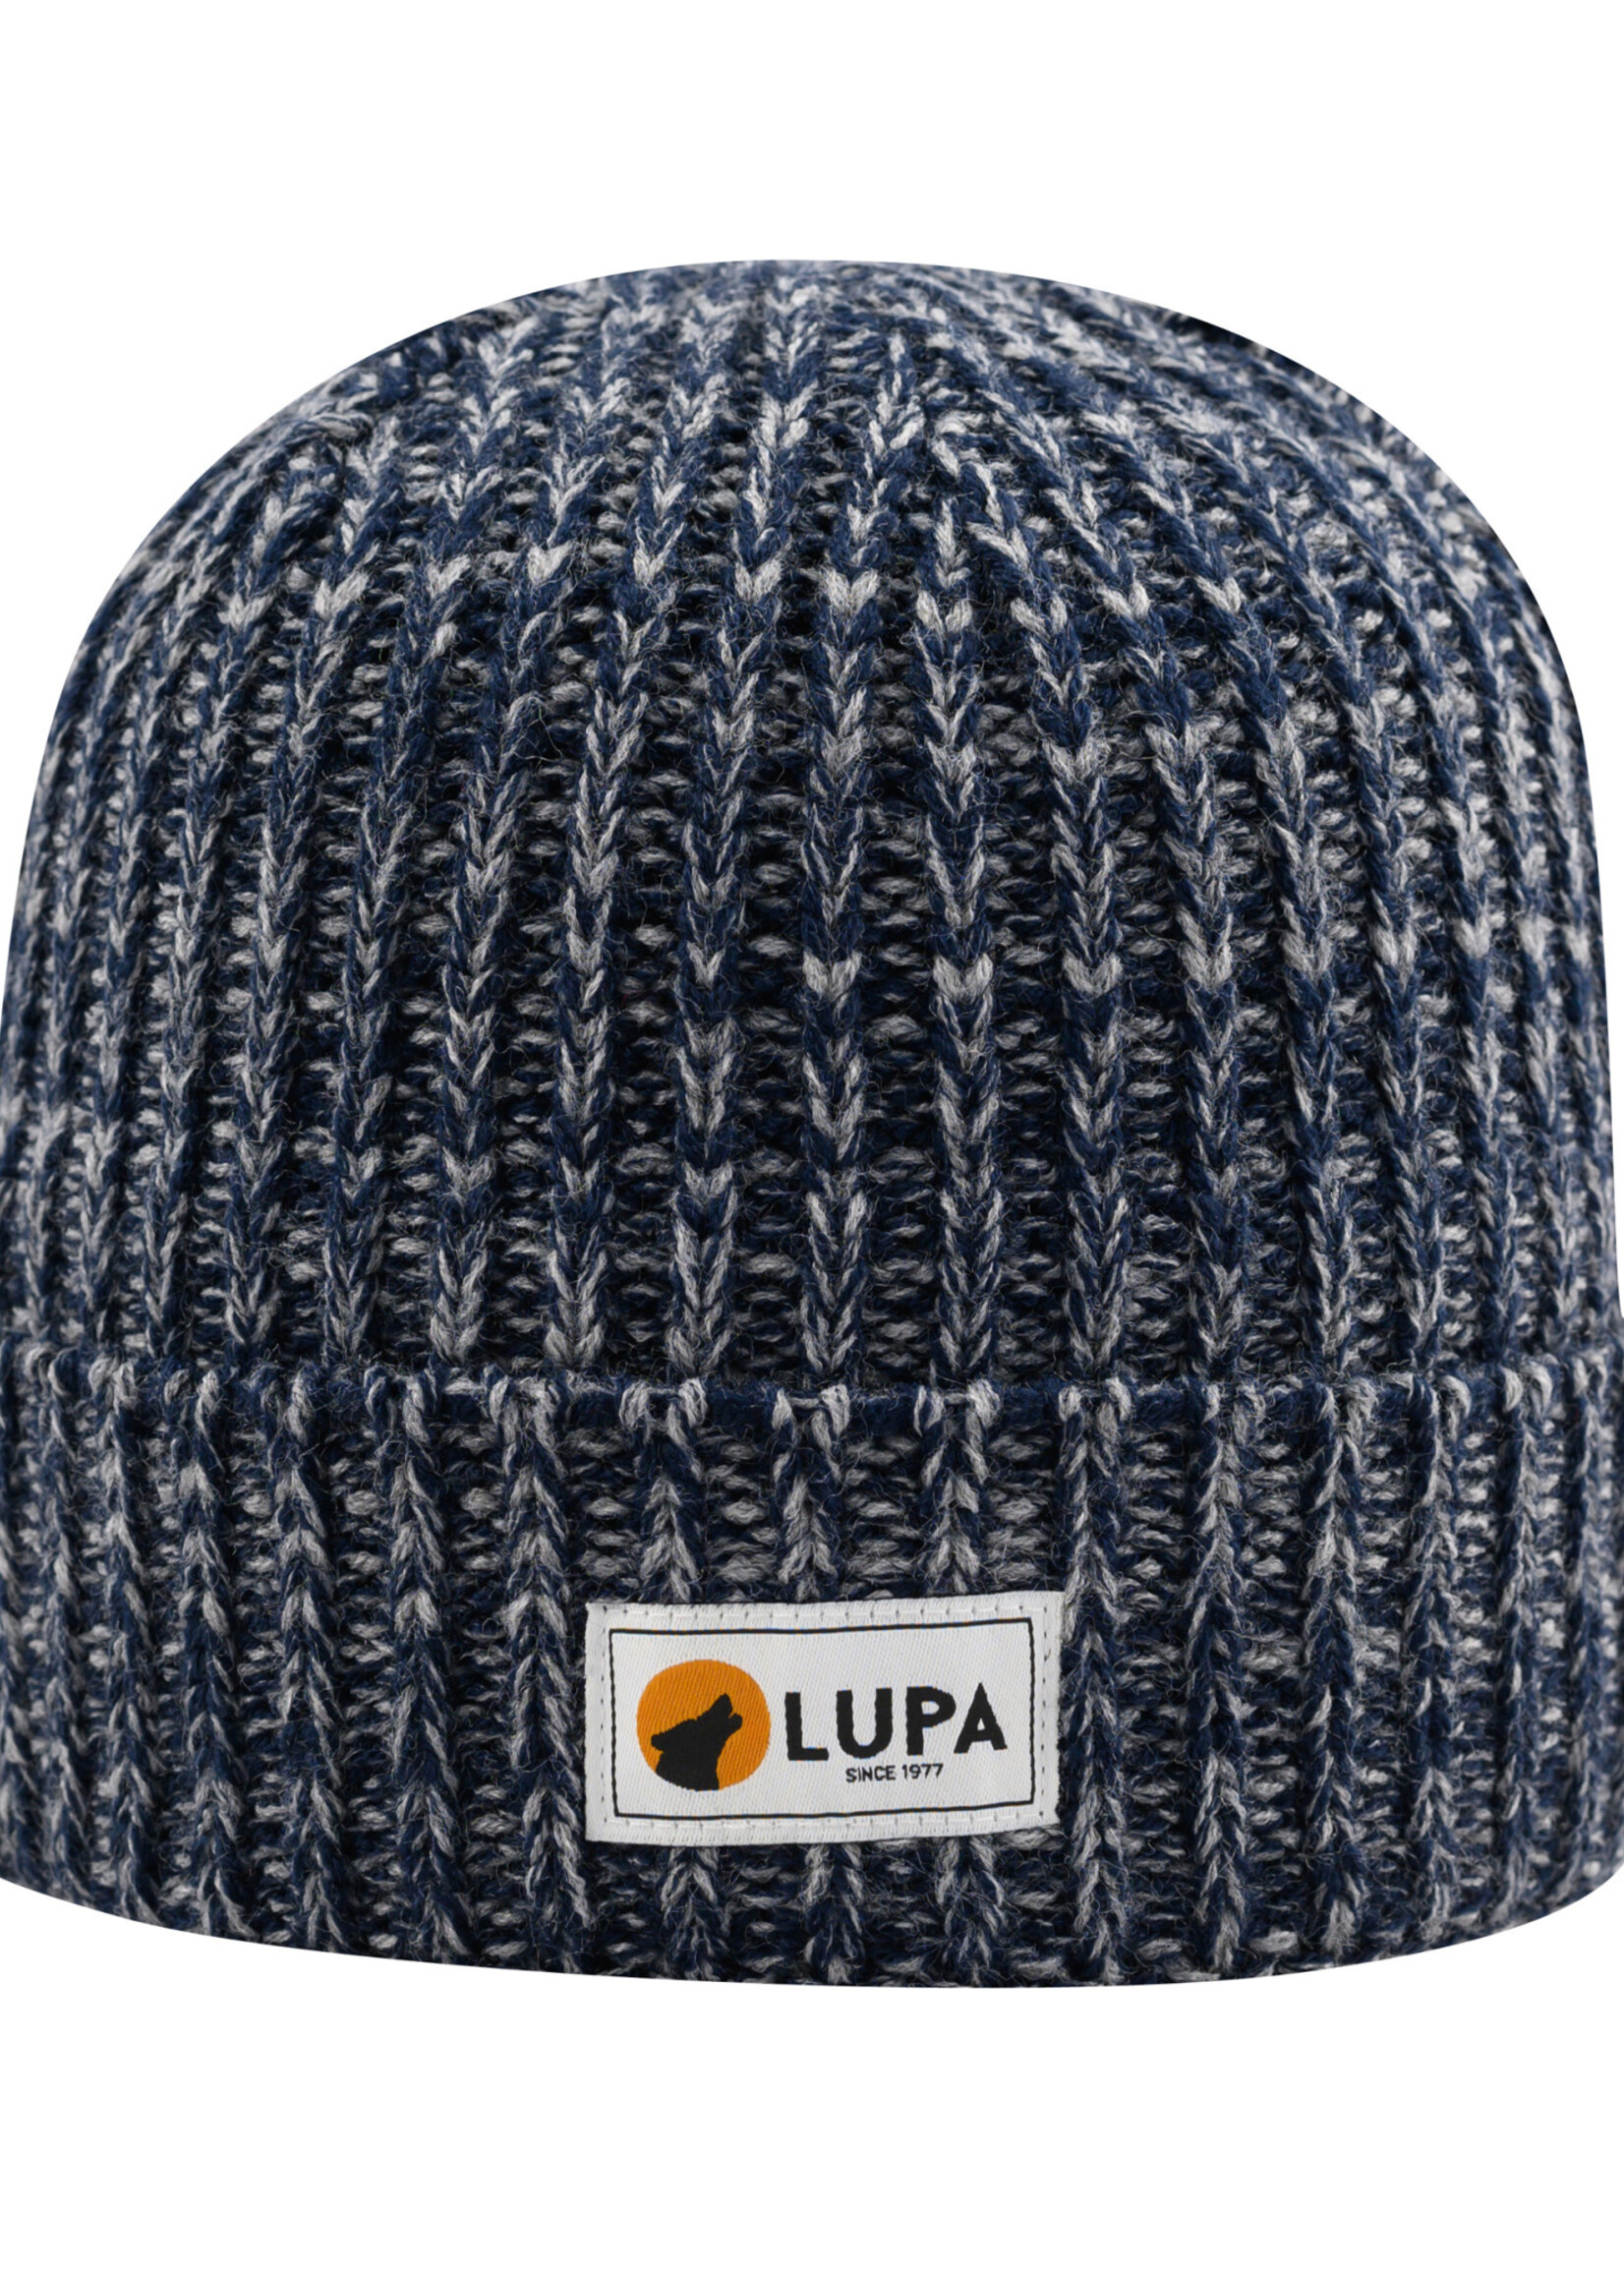 Lupa Tuque Froid Extreme Adulte | Canadian-made Extreme Cold Beanie (Adult)